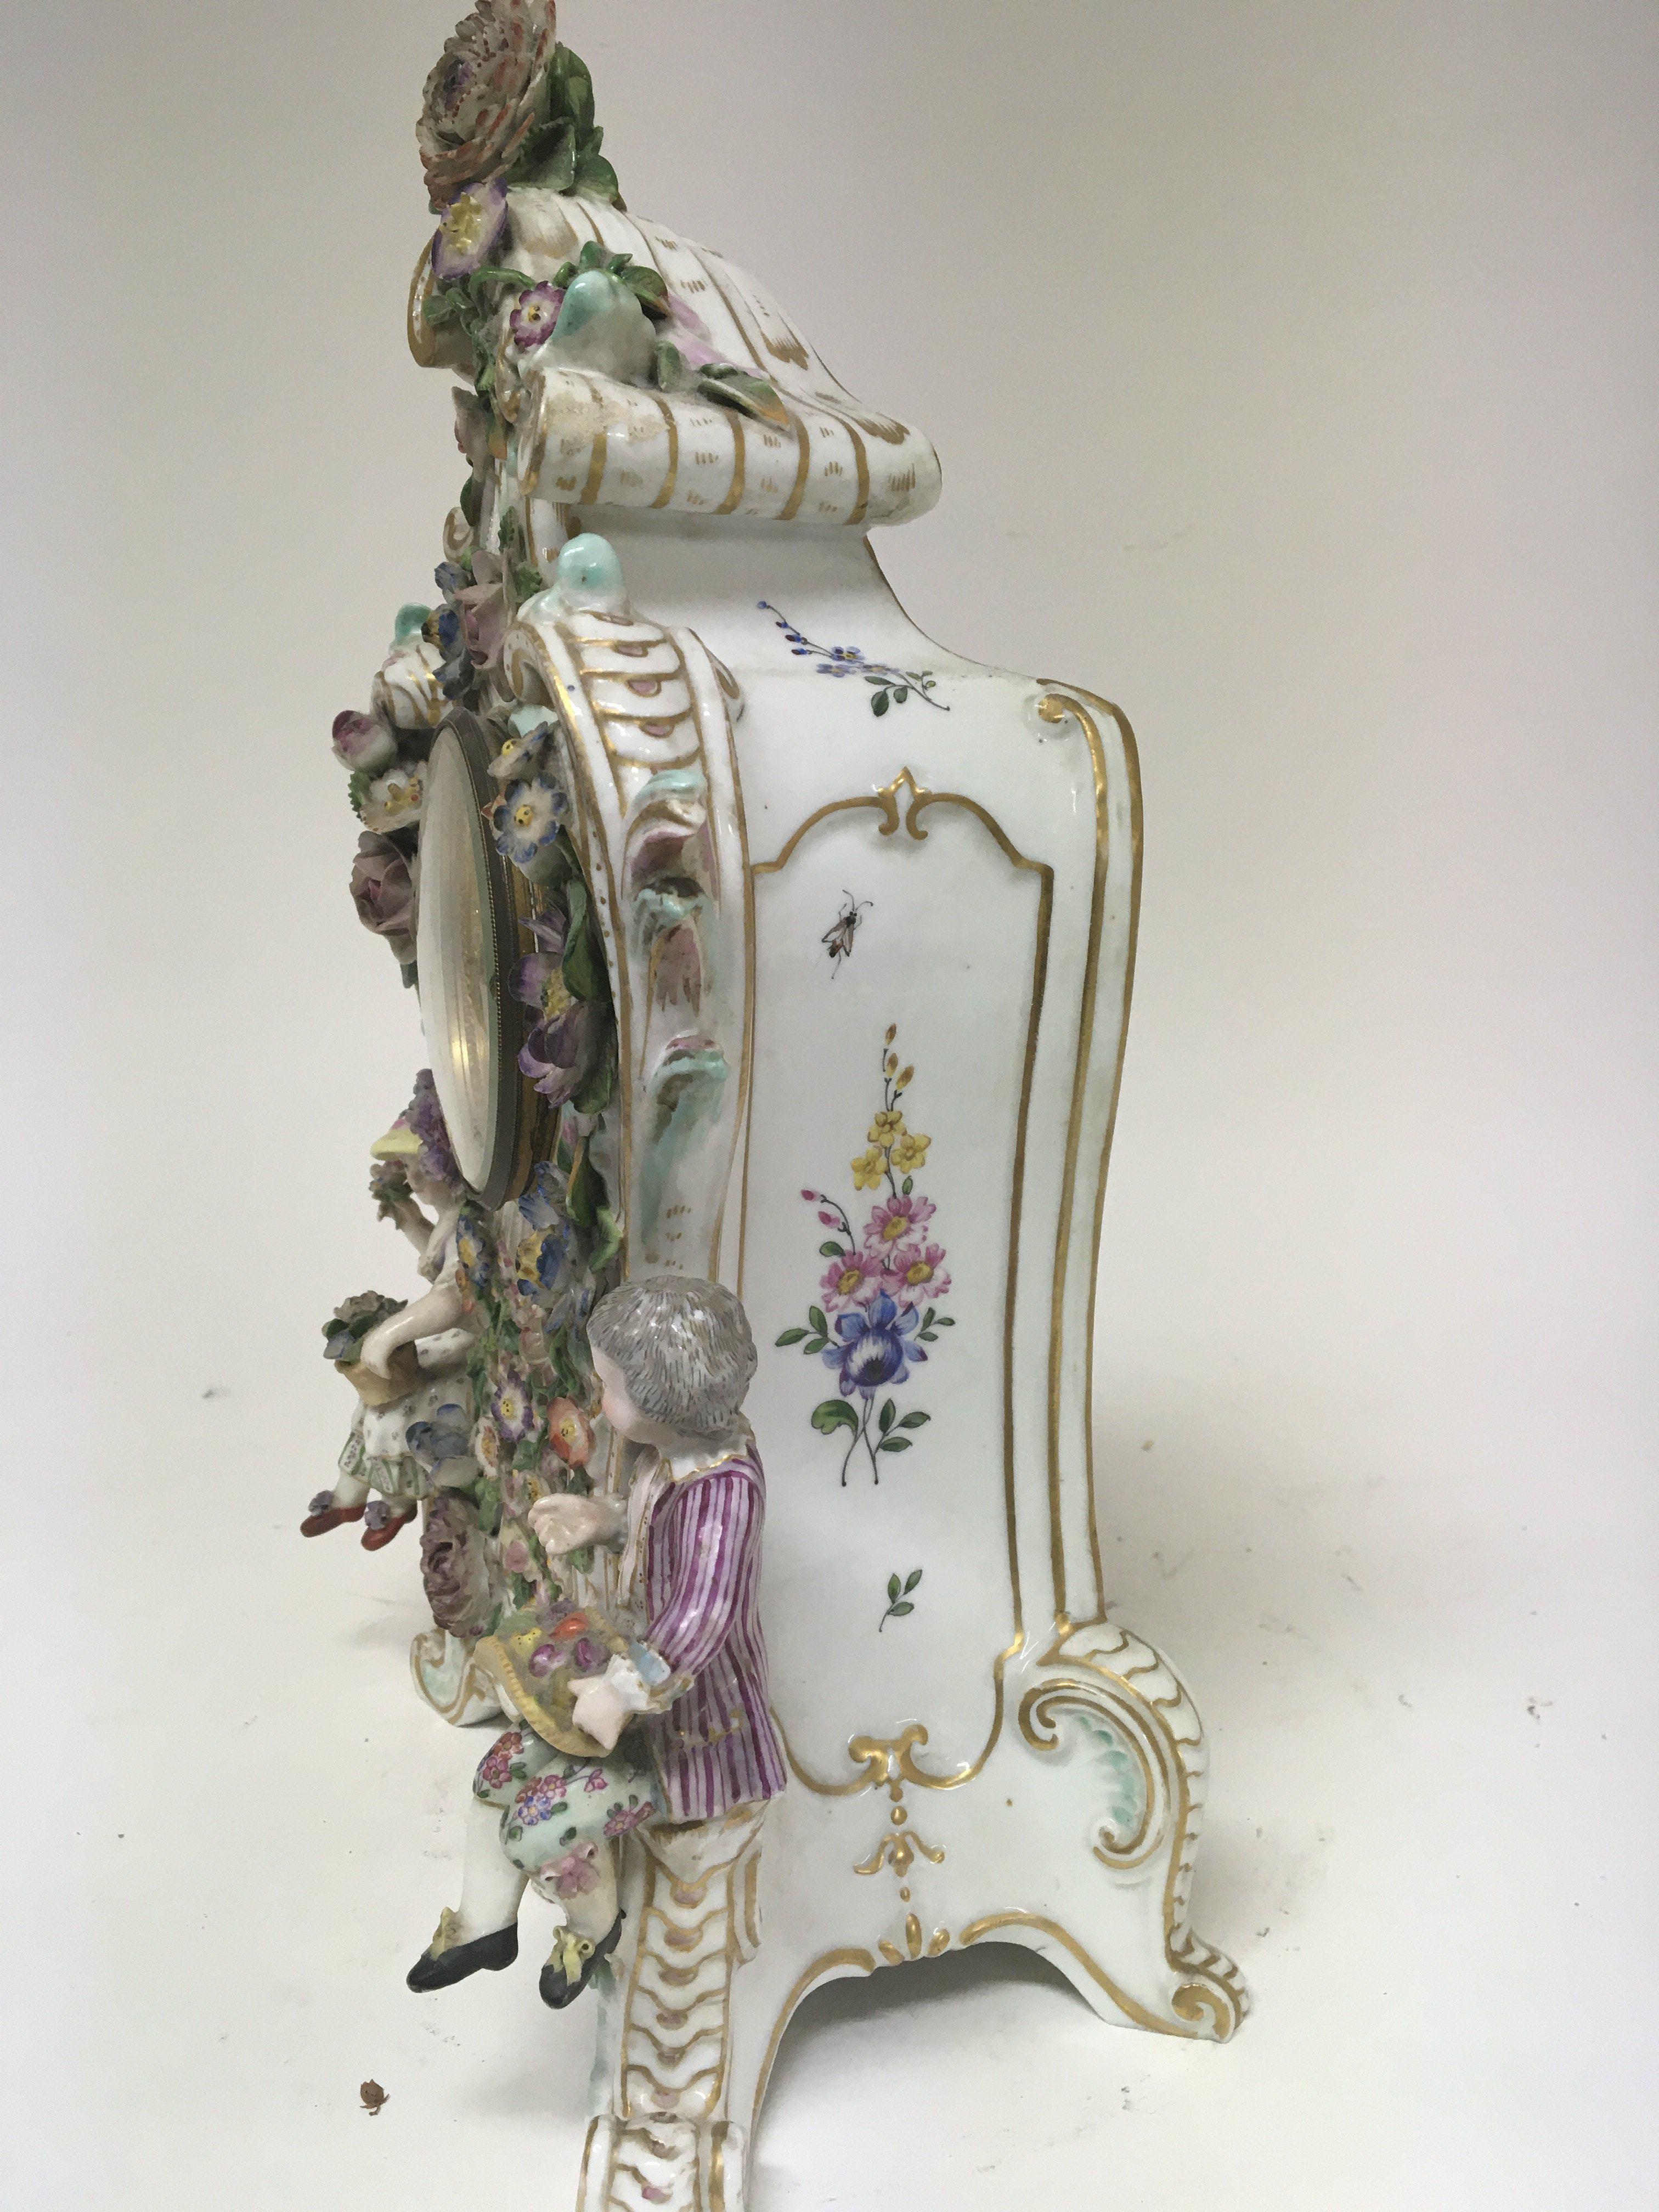 A quality late 19th century German porcelain clock - Image 2 of 6